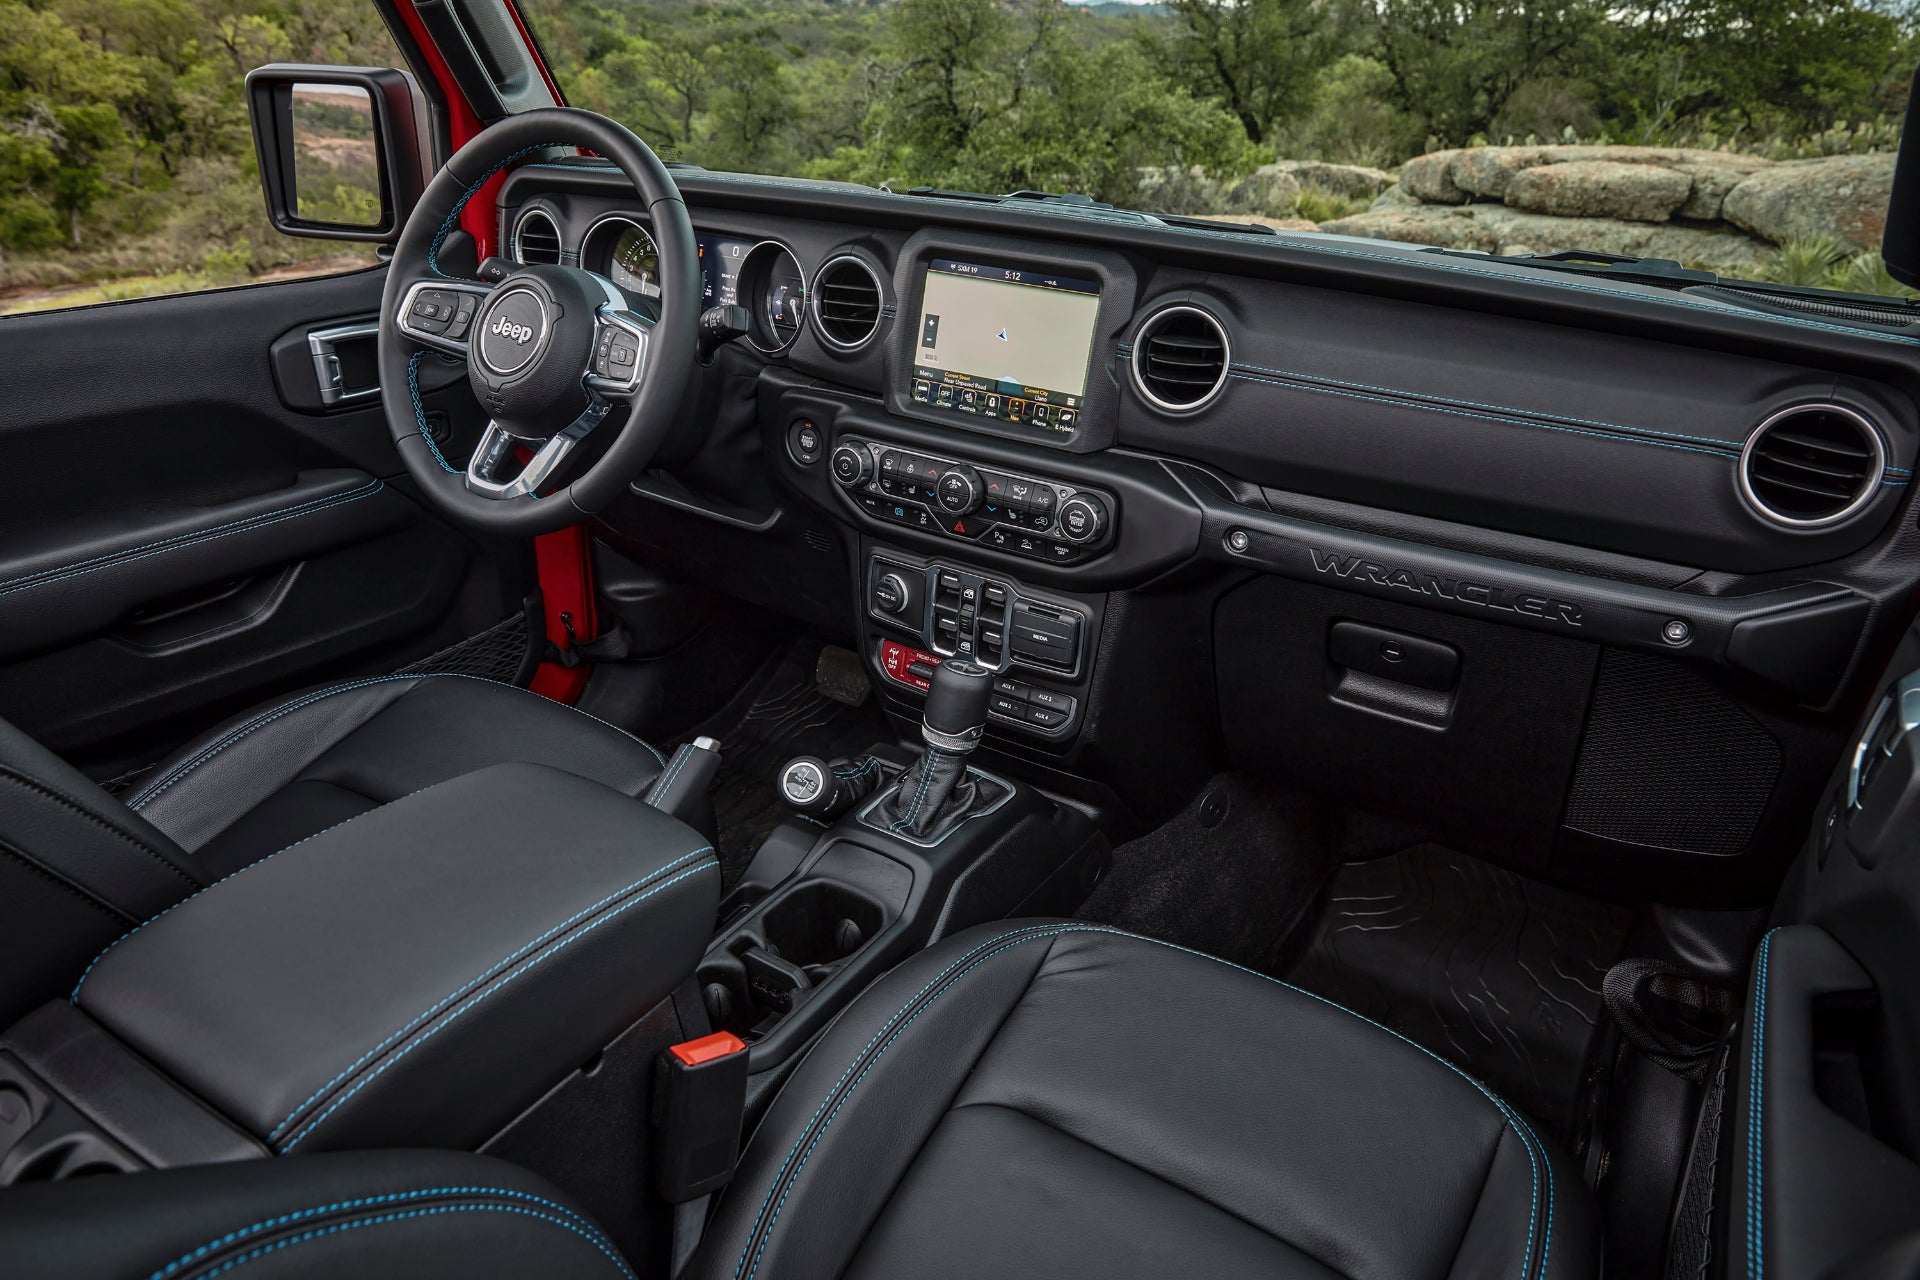 2021 Jeep Wrangler 4xe Review: The Perfect One-Car Garage for Off-Roaders